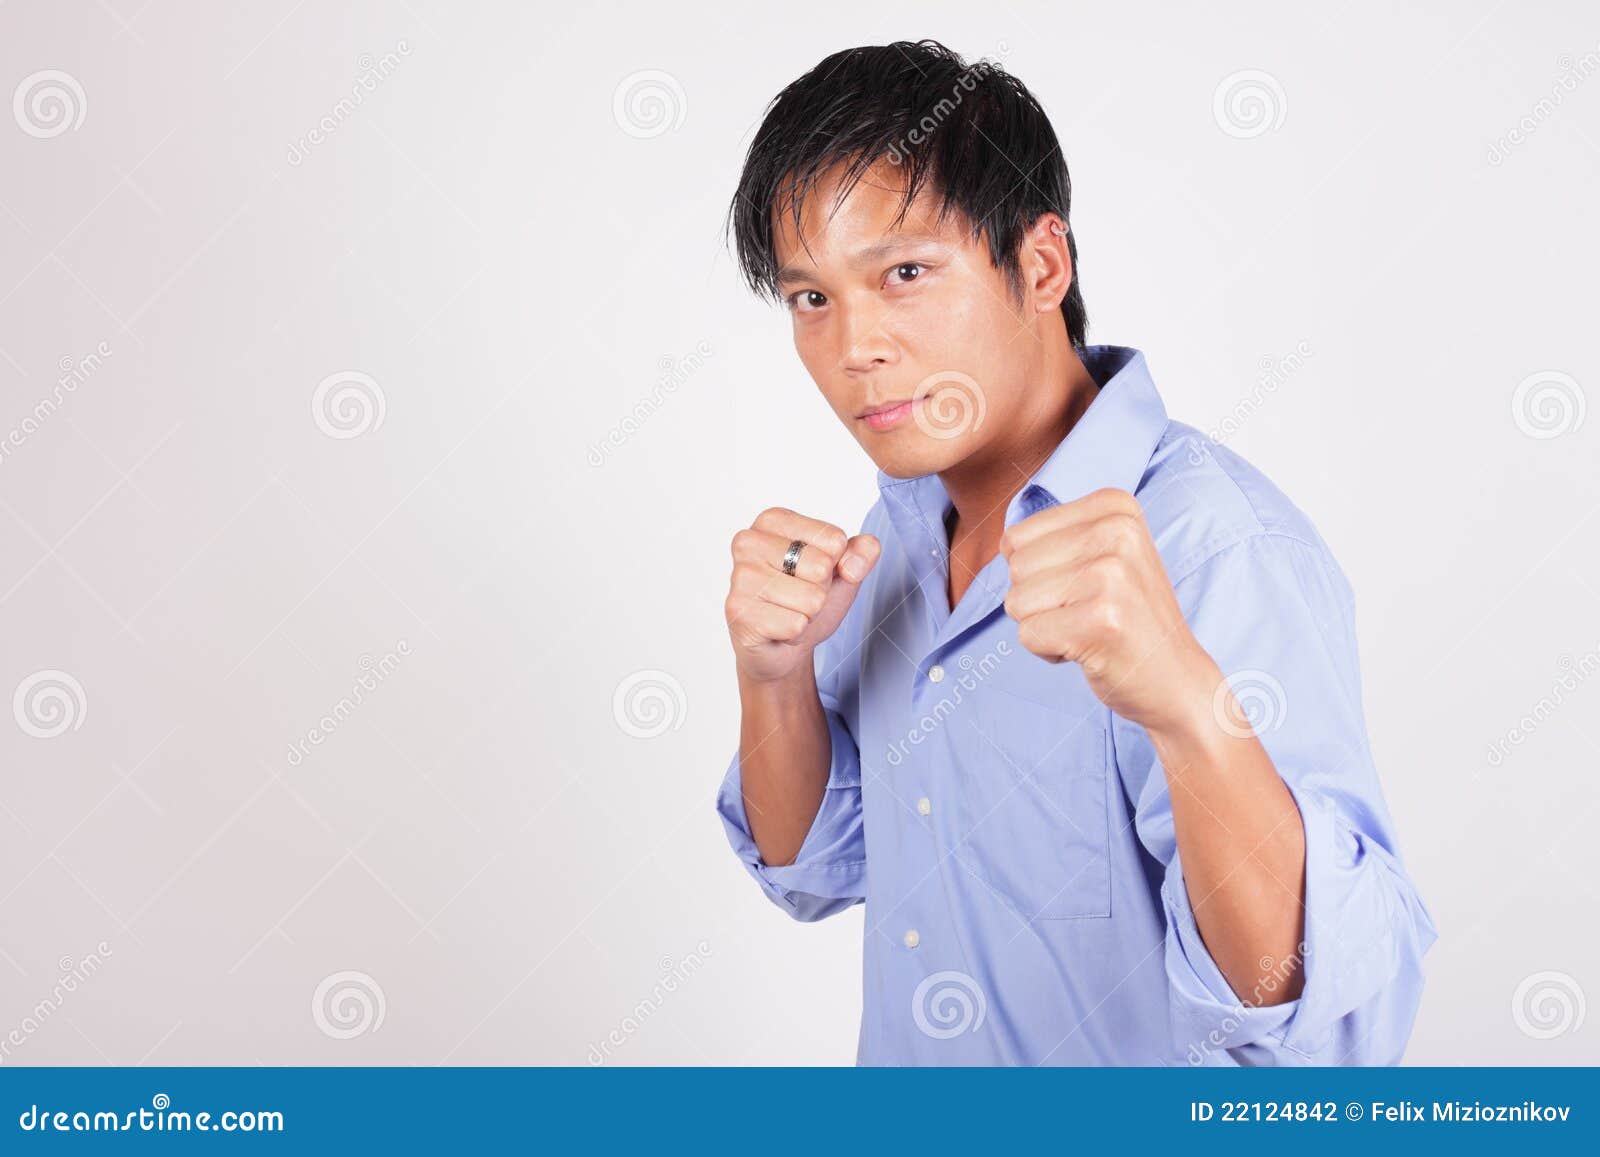 Businessman In A Fighting Pose Stock Photography - Image: 22124842